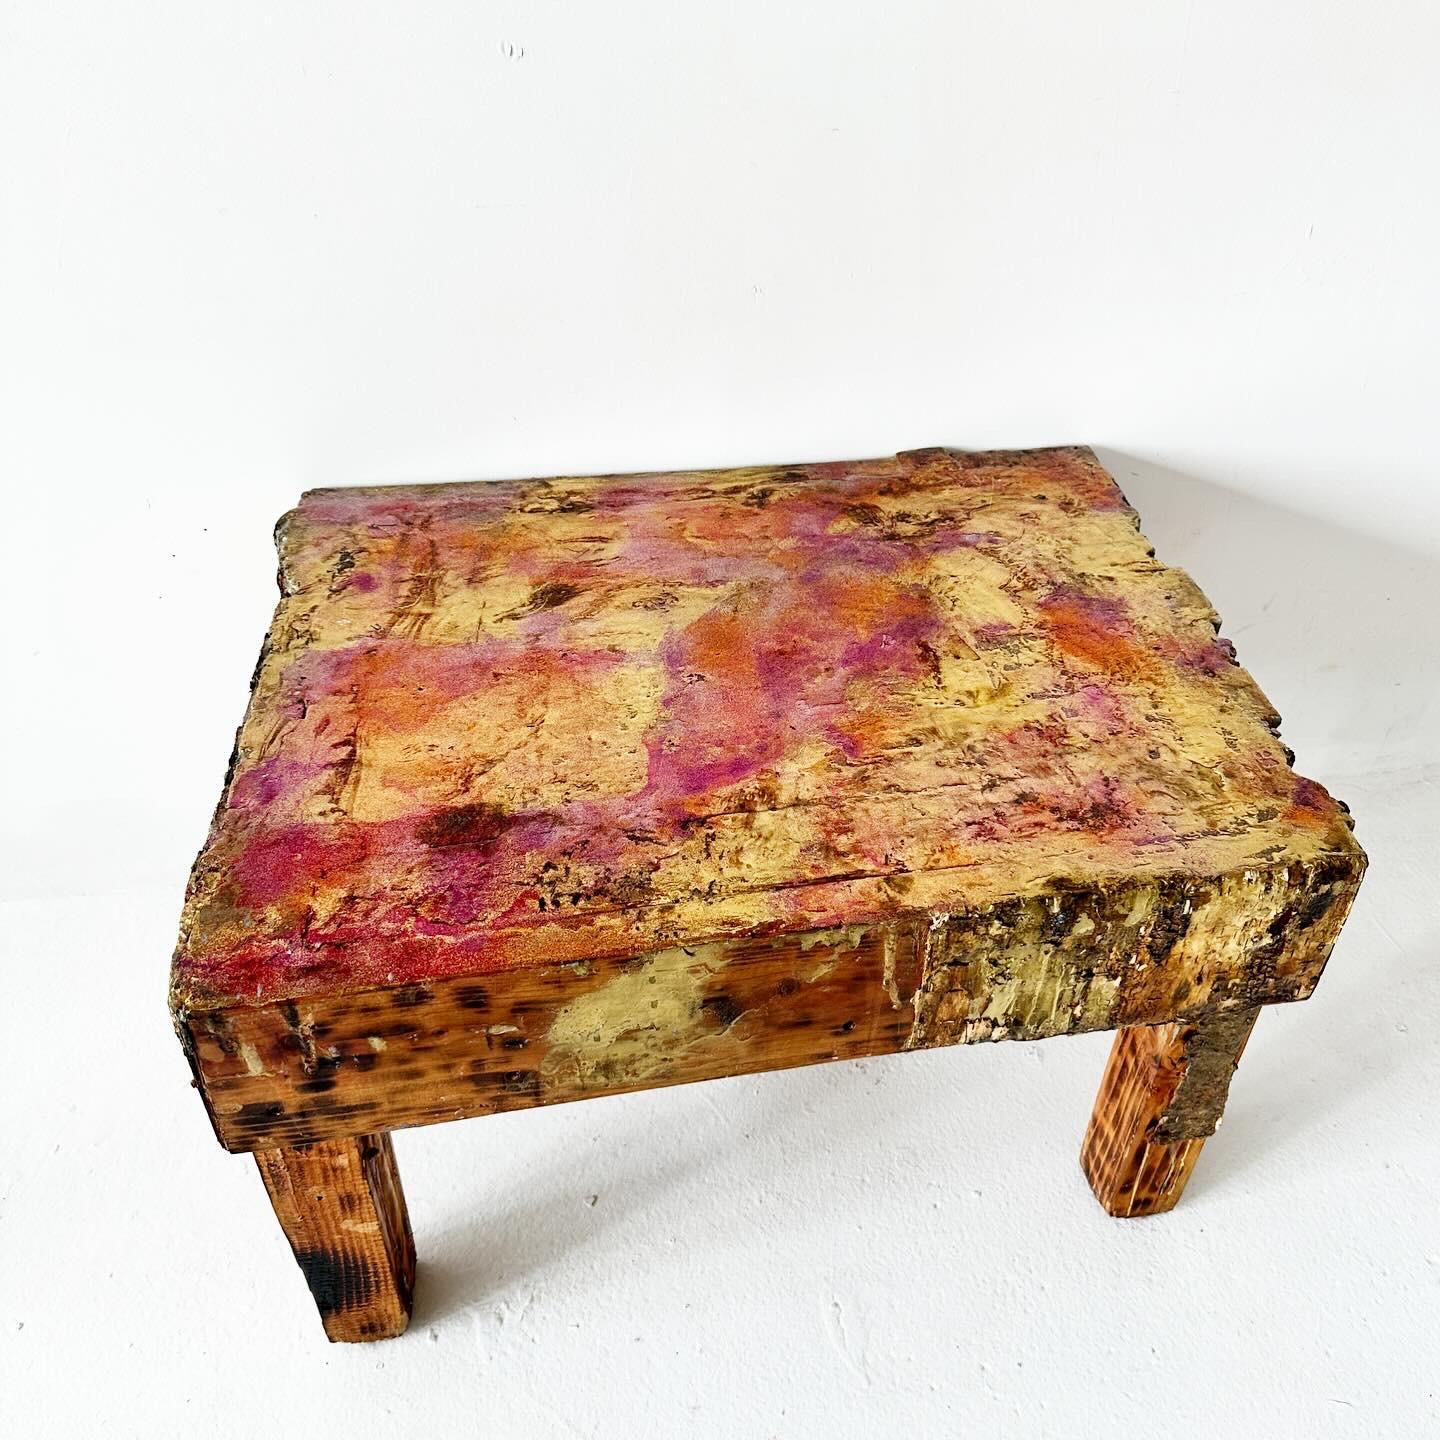 one of a kind, artist made, brutalist coffee table or side table. Solid birch (with bark accents and burn marks), glossy surface with gold and magenta under lacquer. Really wild, I love it.